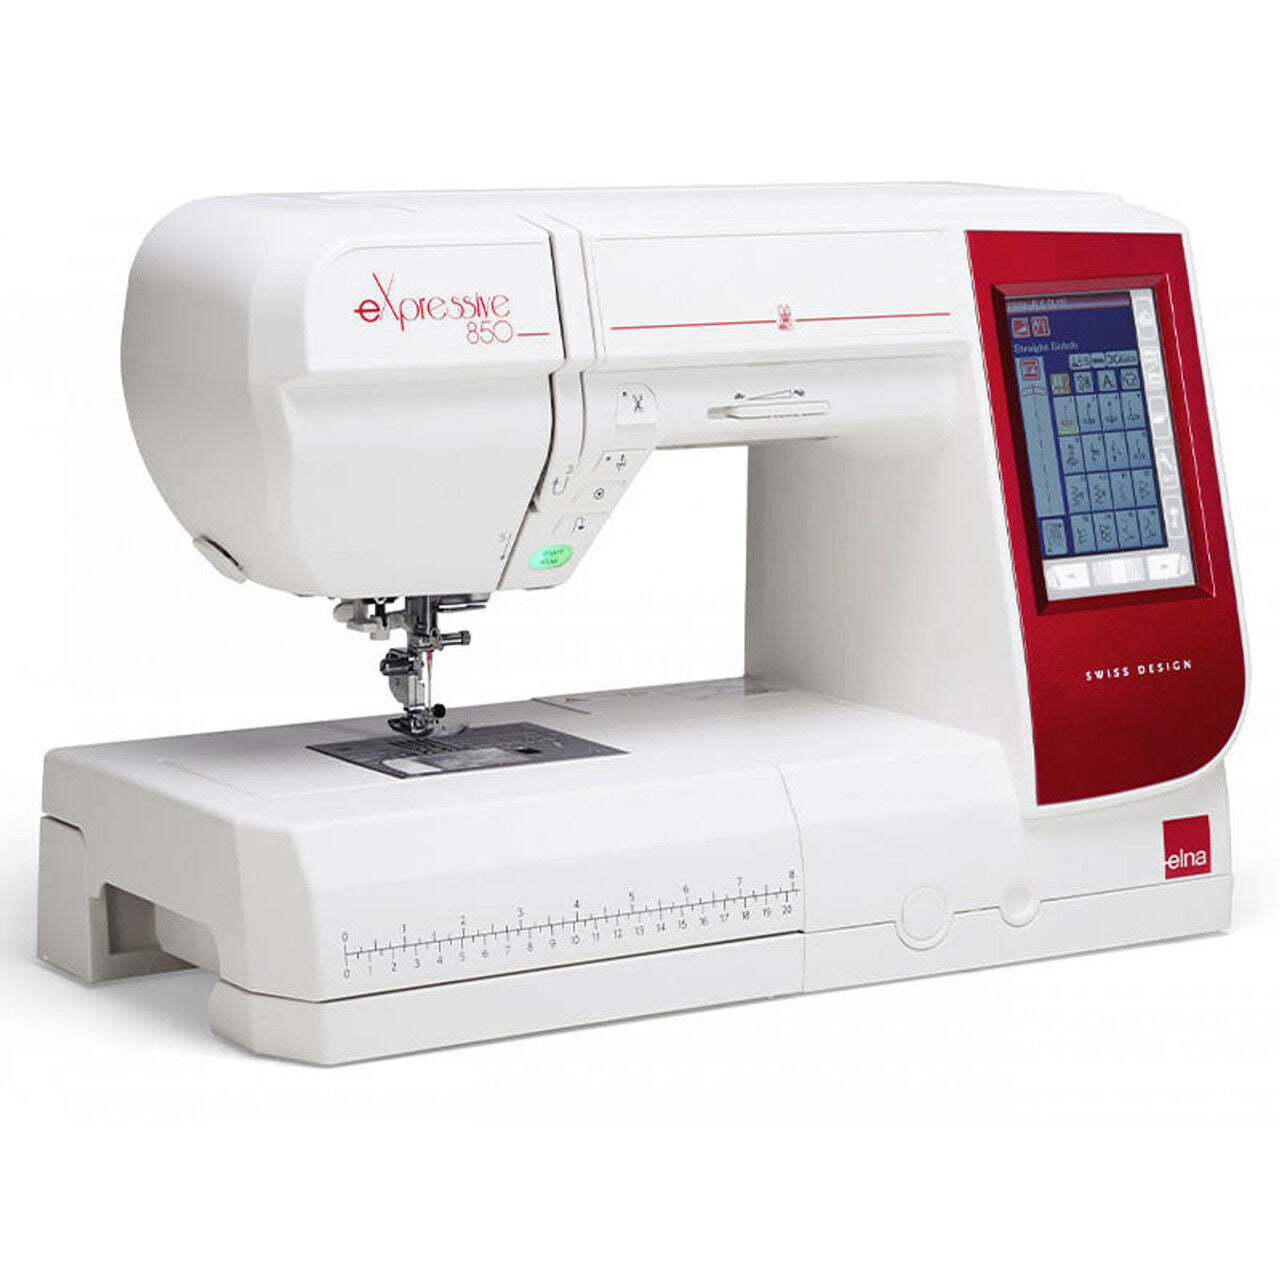 elna eXpressive 850 Sewing and Embroidery Machine